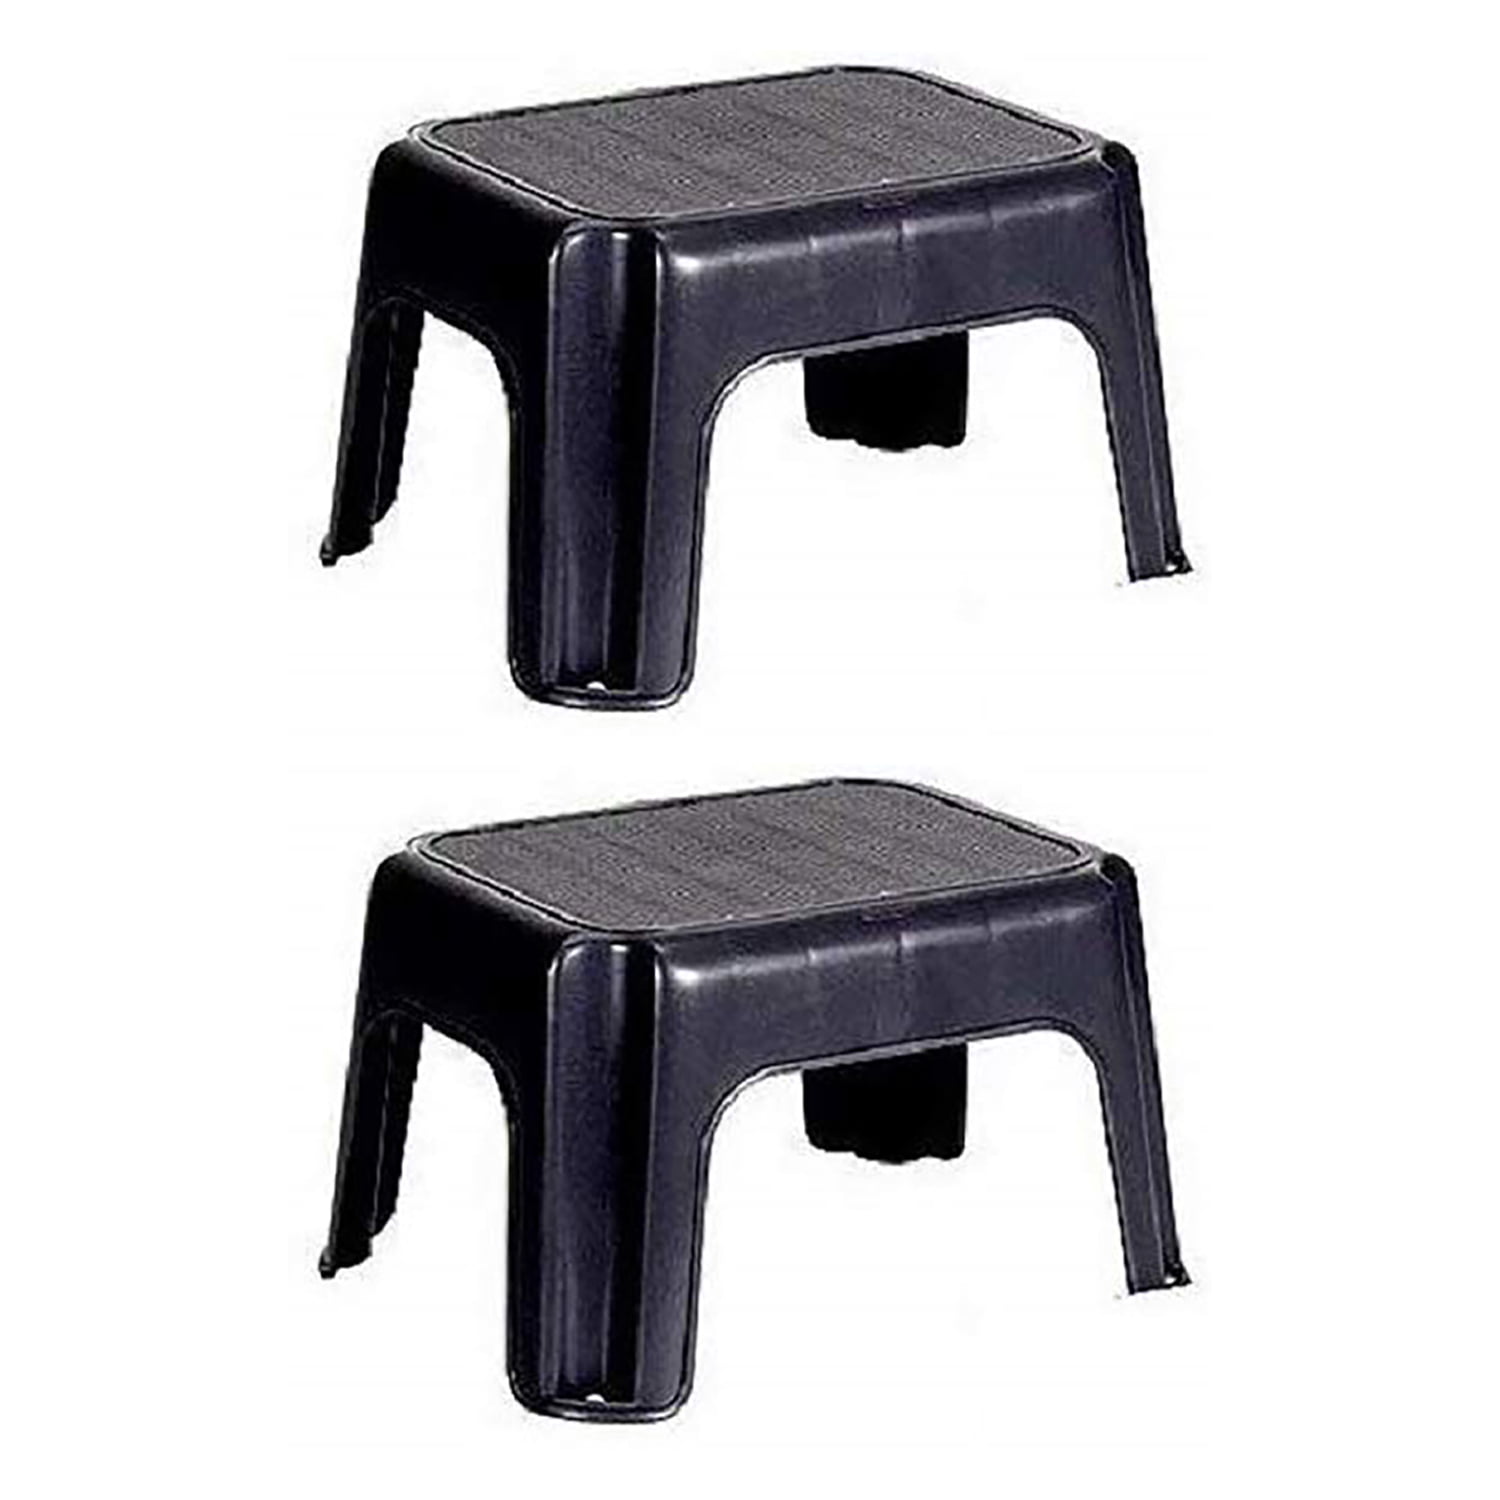 3 Pack Rubbermaid Durable Plastic Roughneck Step Stool w/ 300-LB Capacity